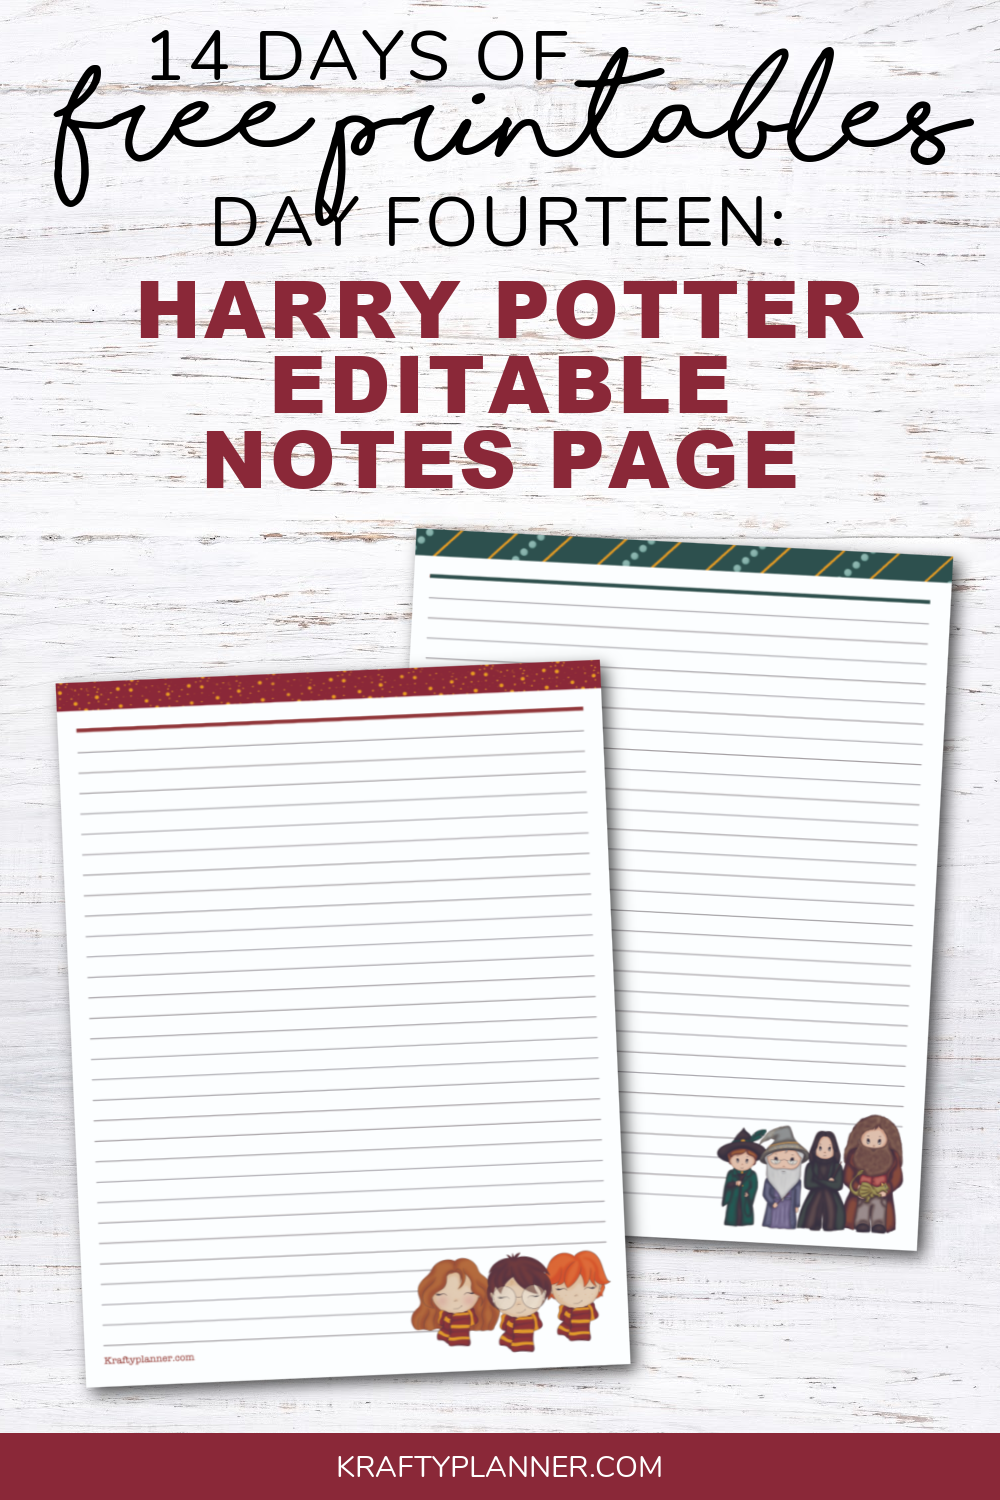 day-14-free-printable-harry-potter-editable-notes-page-krafty-planner